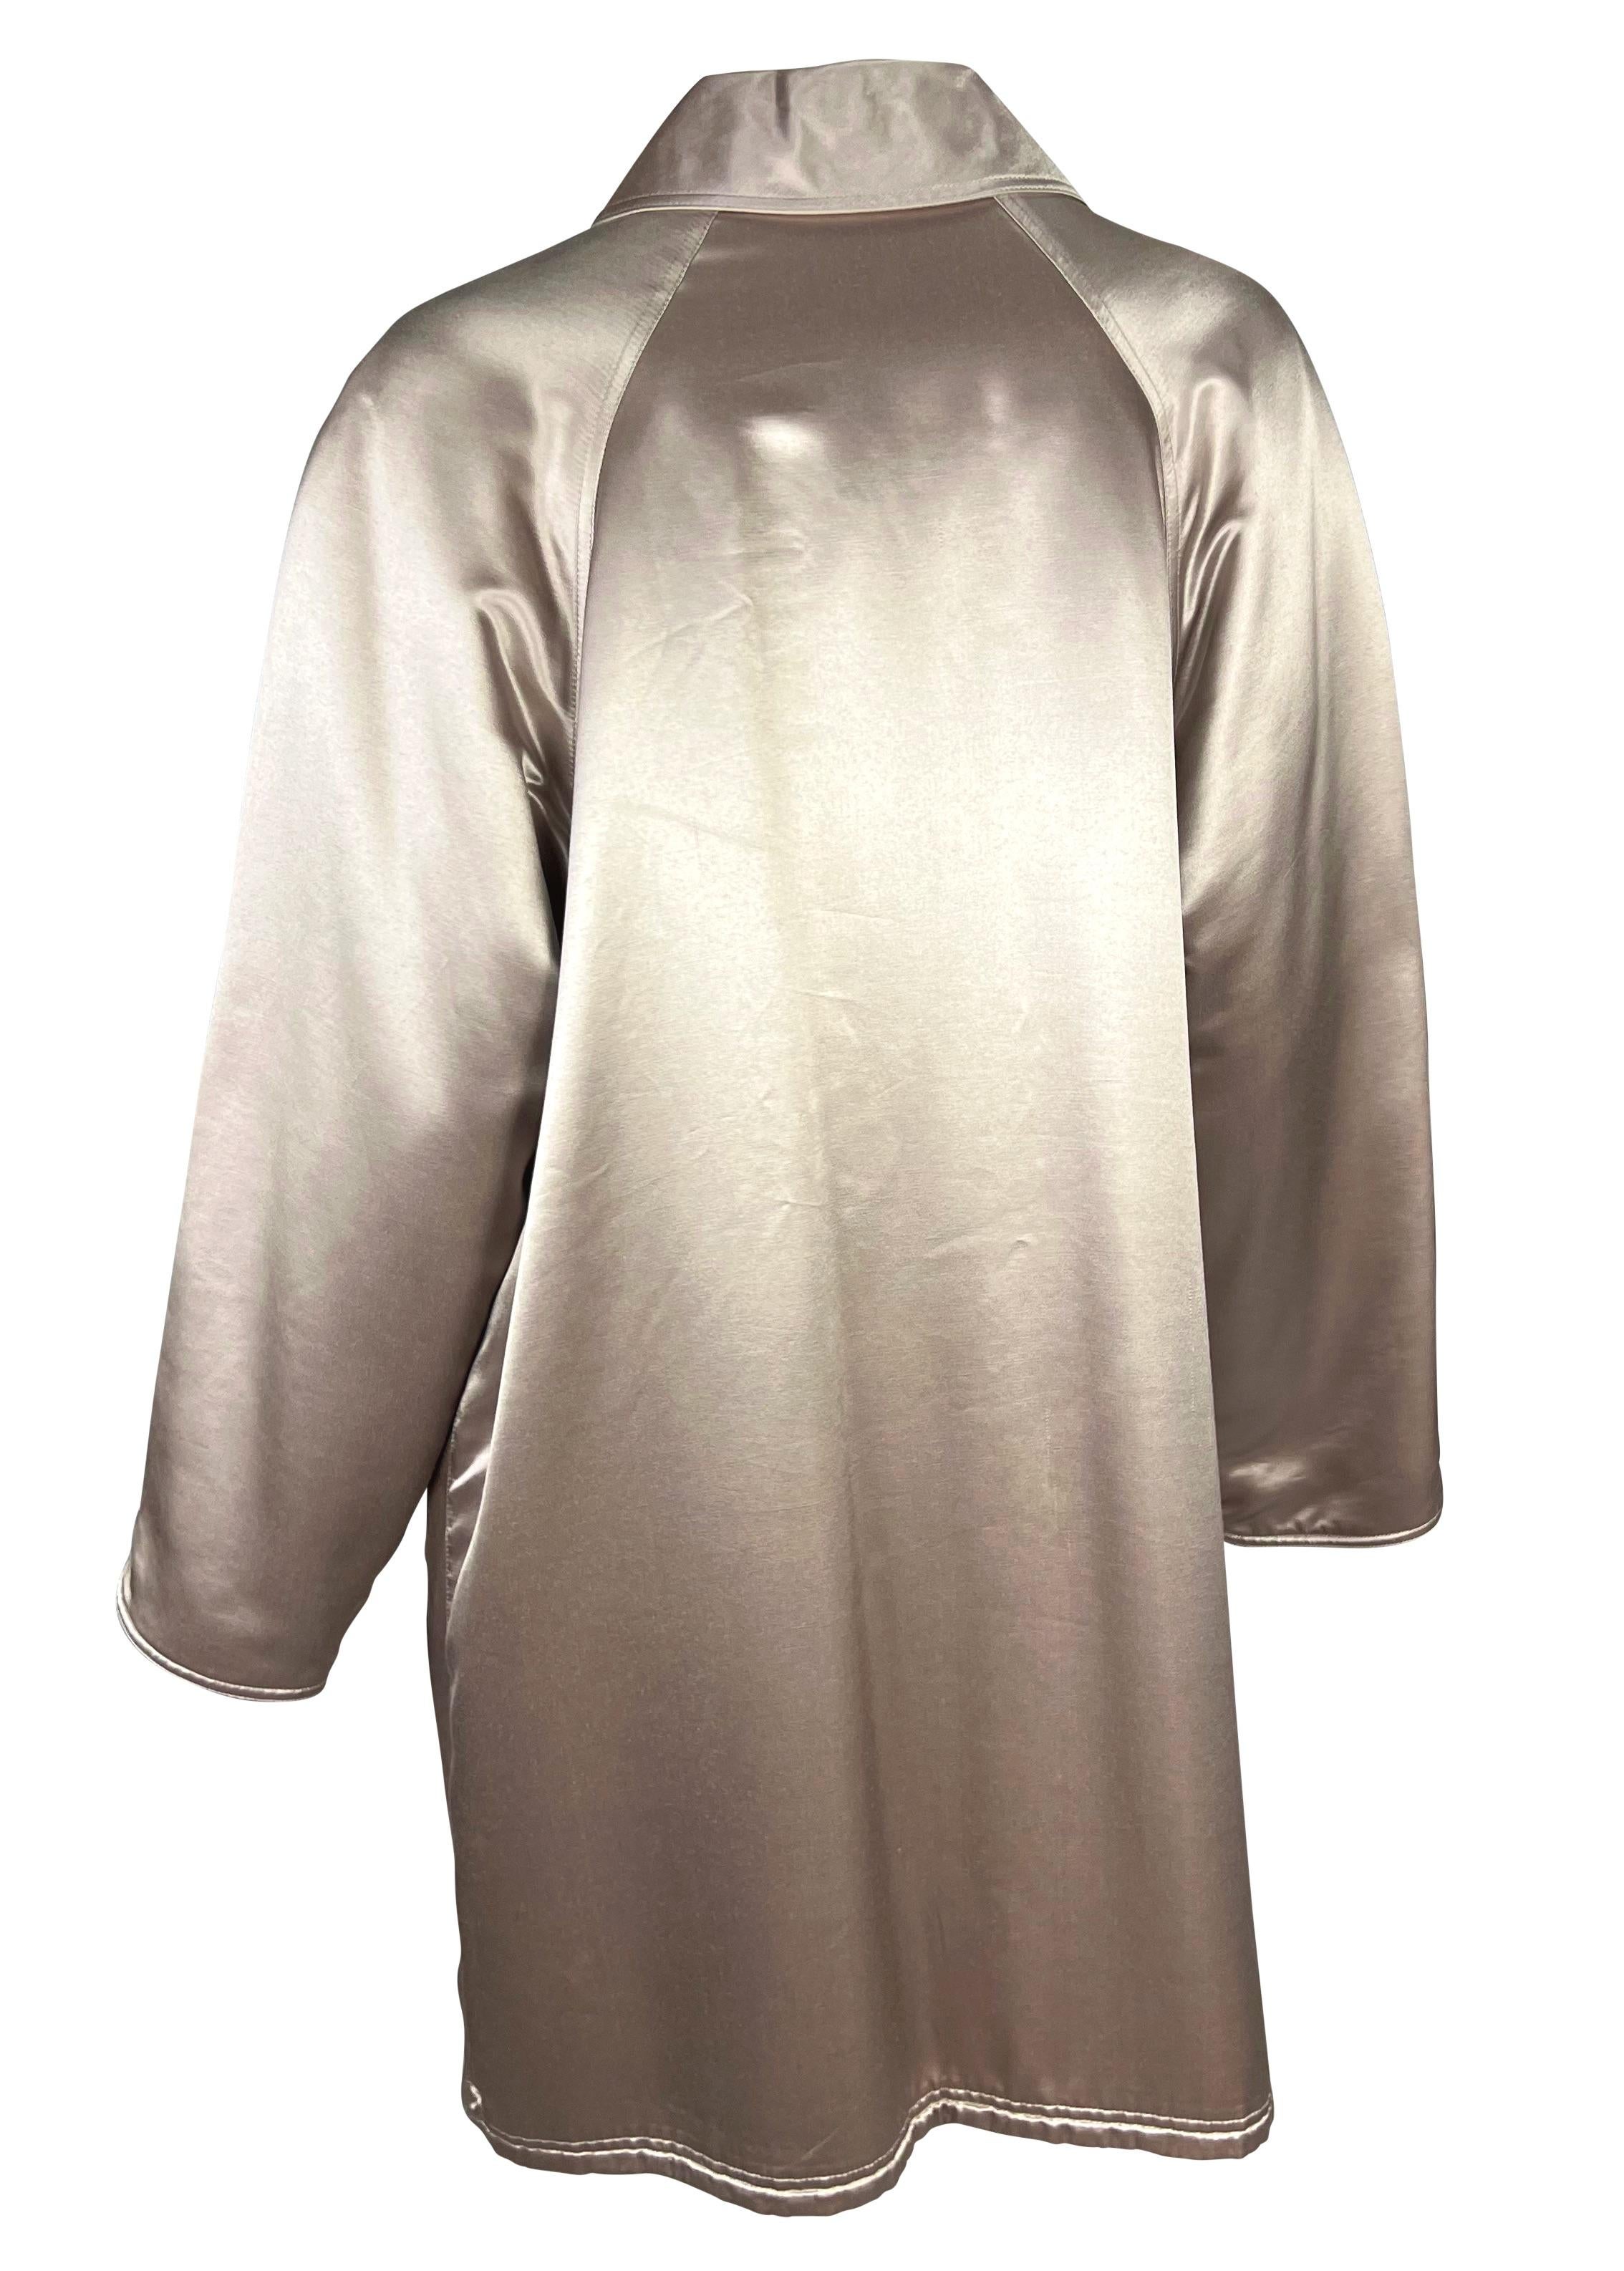 F/W 1995 Gianni Versace Couture Runway Silver Blush Satin Button Coat For Sale 2